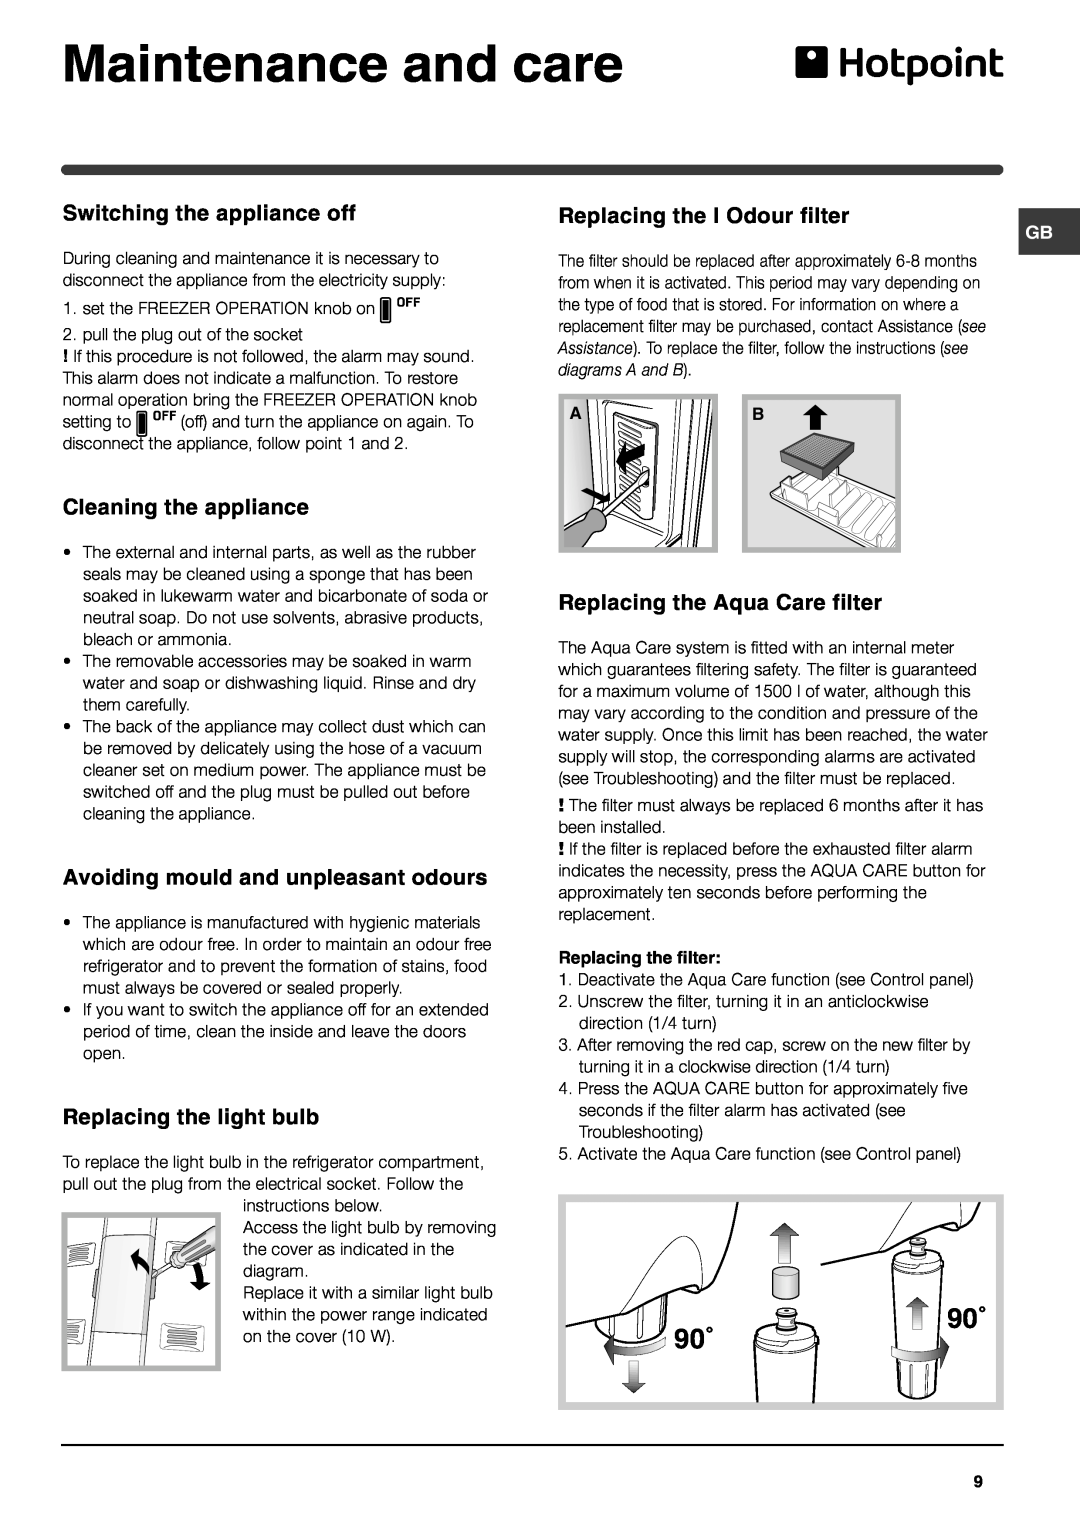 Hotpoint FFQ50P manual Maintenance and care, 90˚ 90˚ 